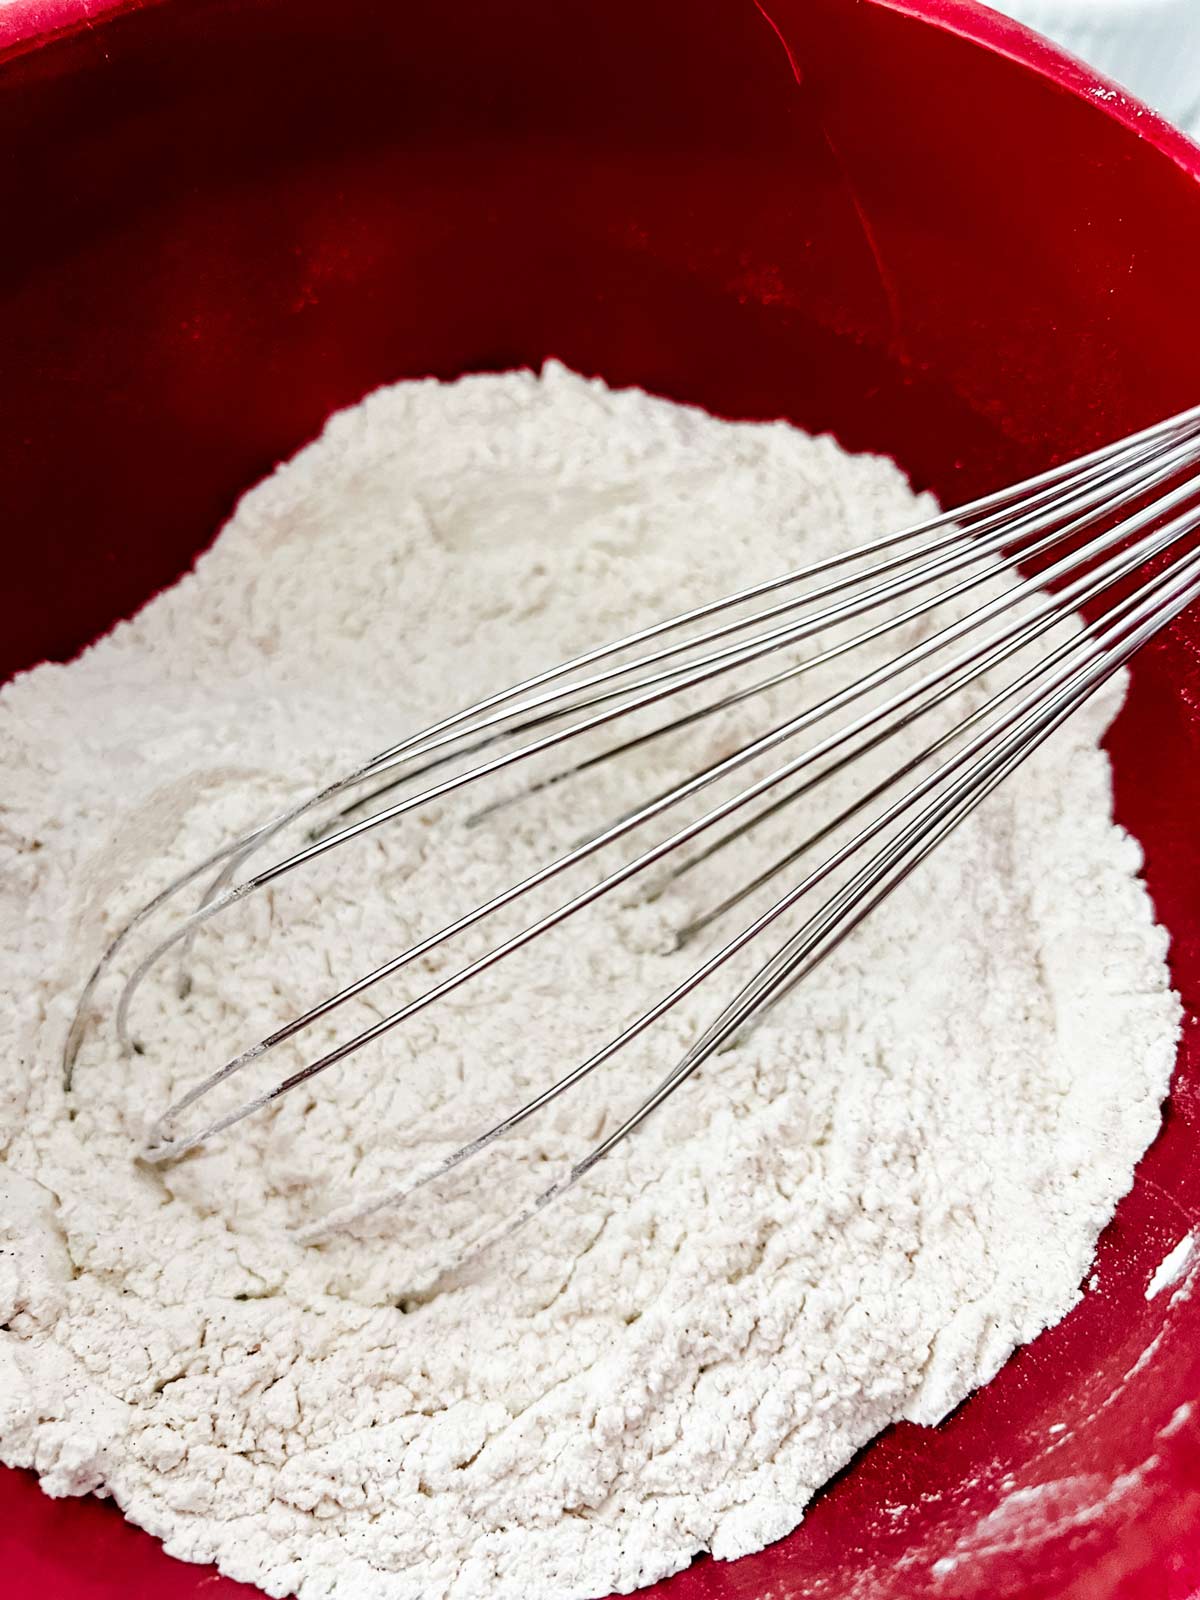 Dry ingredients for cookies being whisked together in a red bowl.